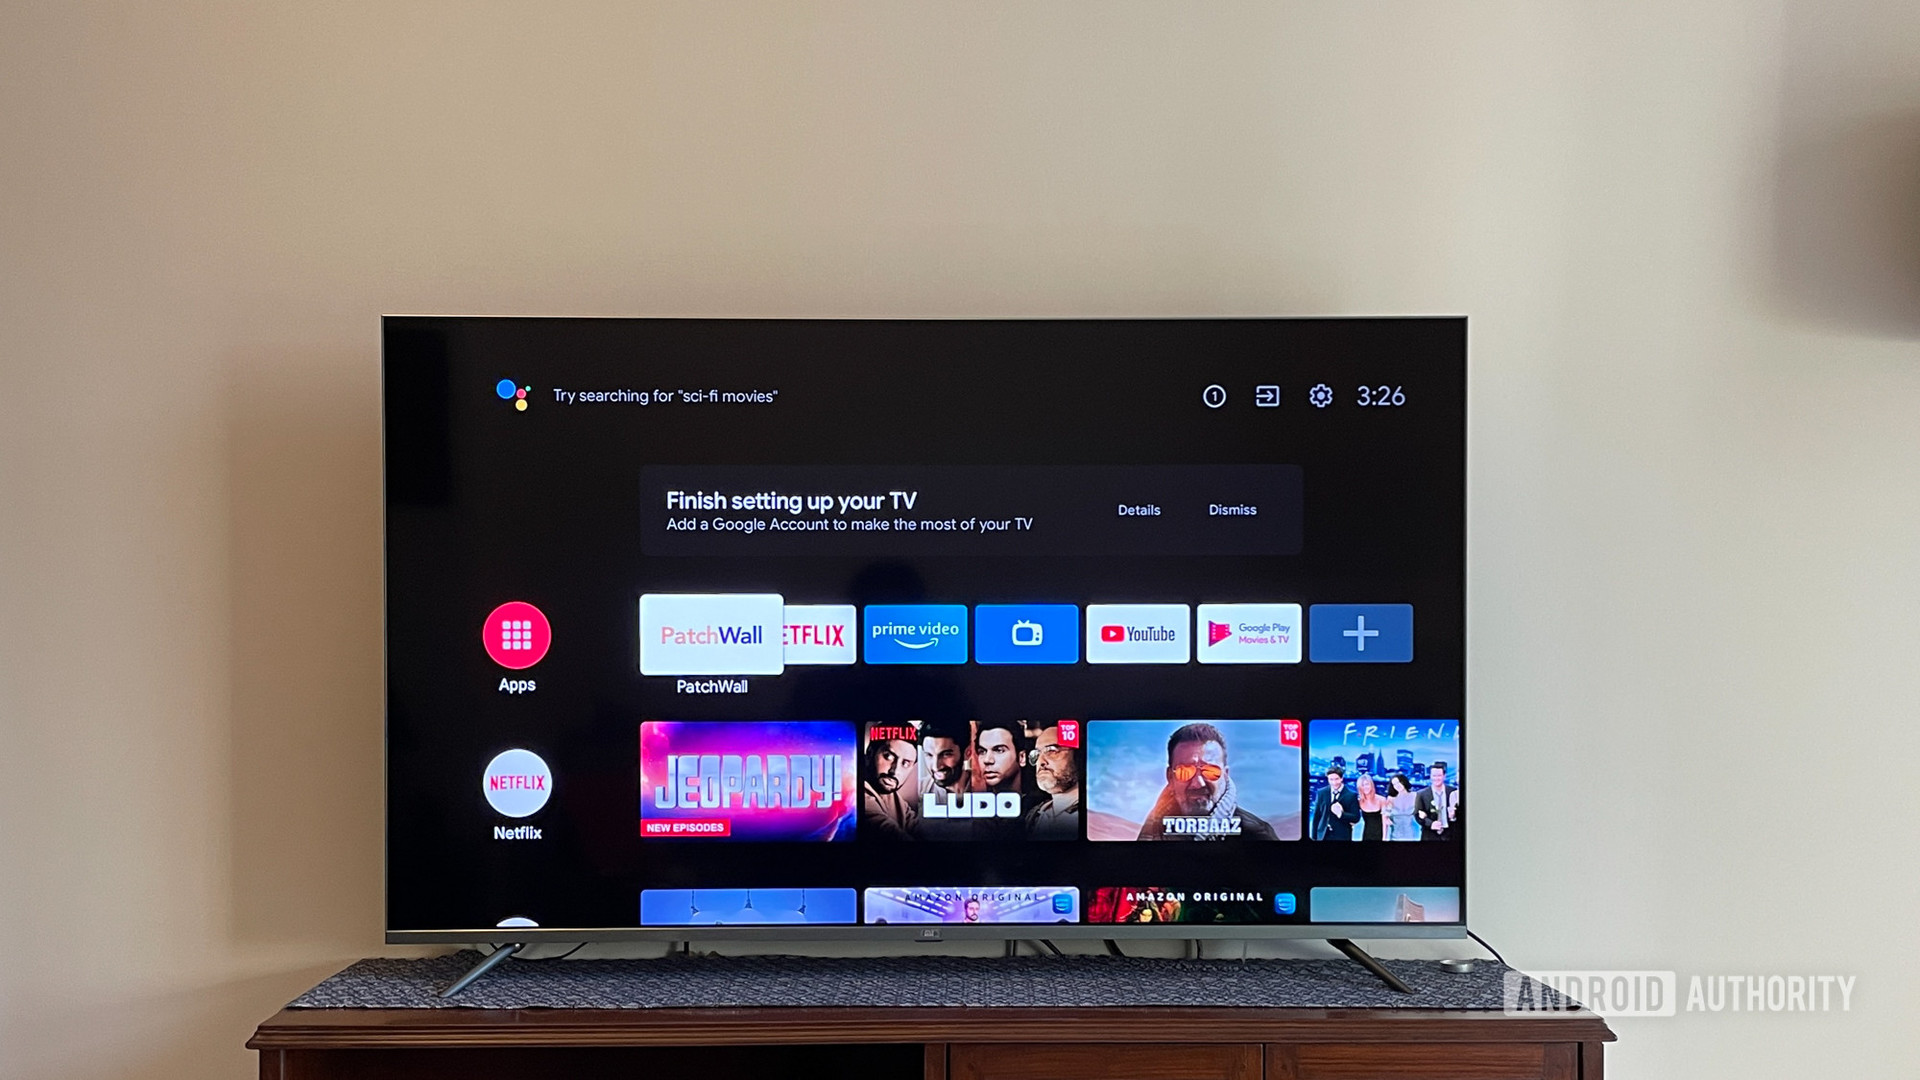 Mi QLED TV 4K with Android TV interface